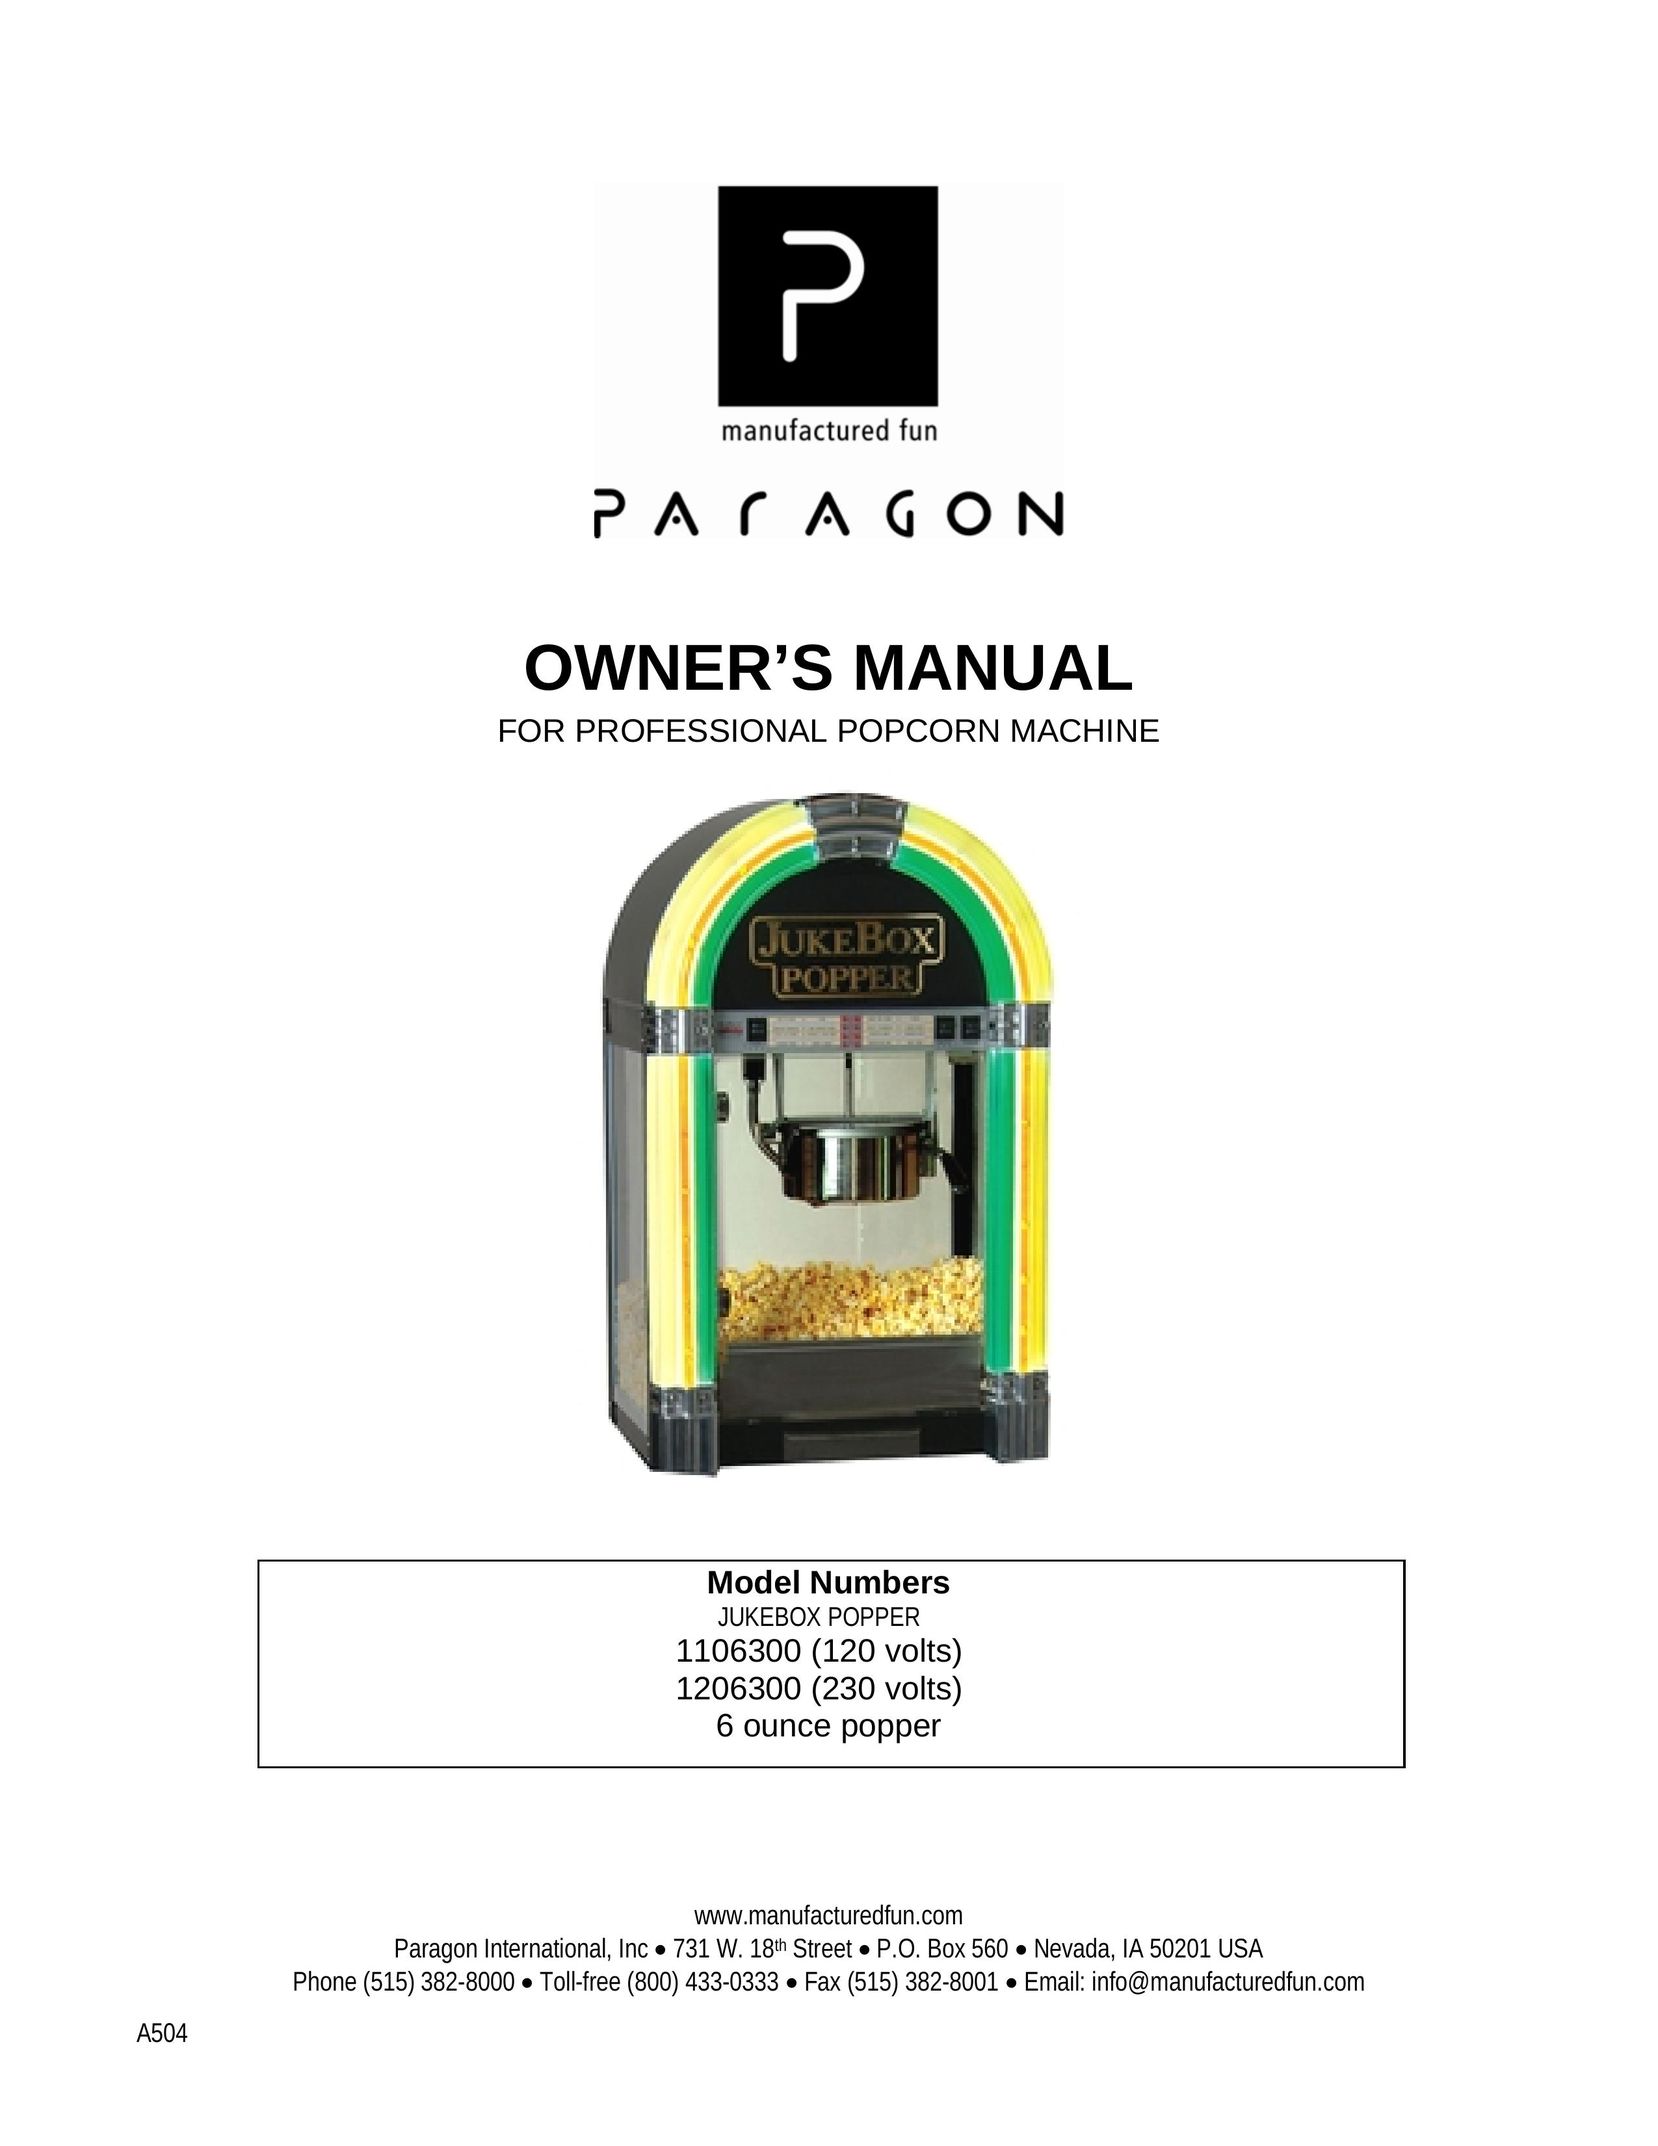 Paragon 1106300 Popcorn Poppers User Manual